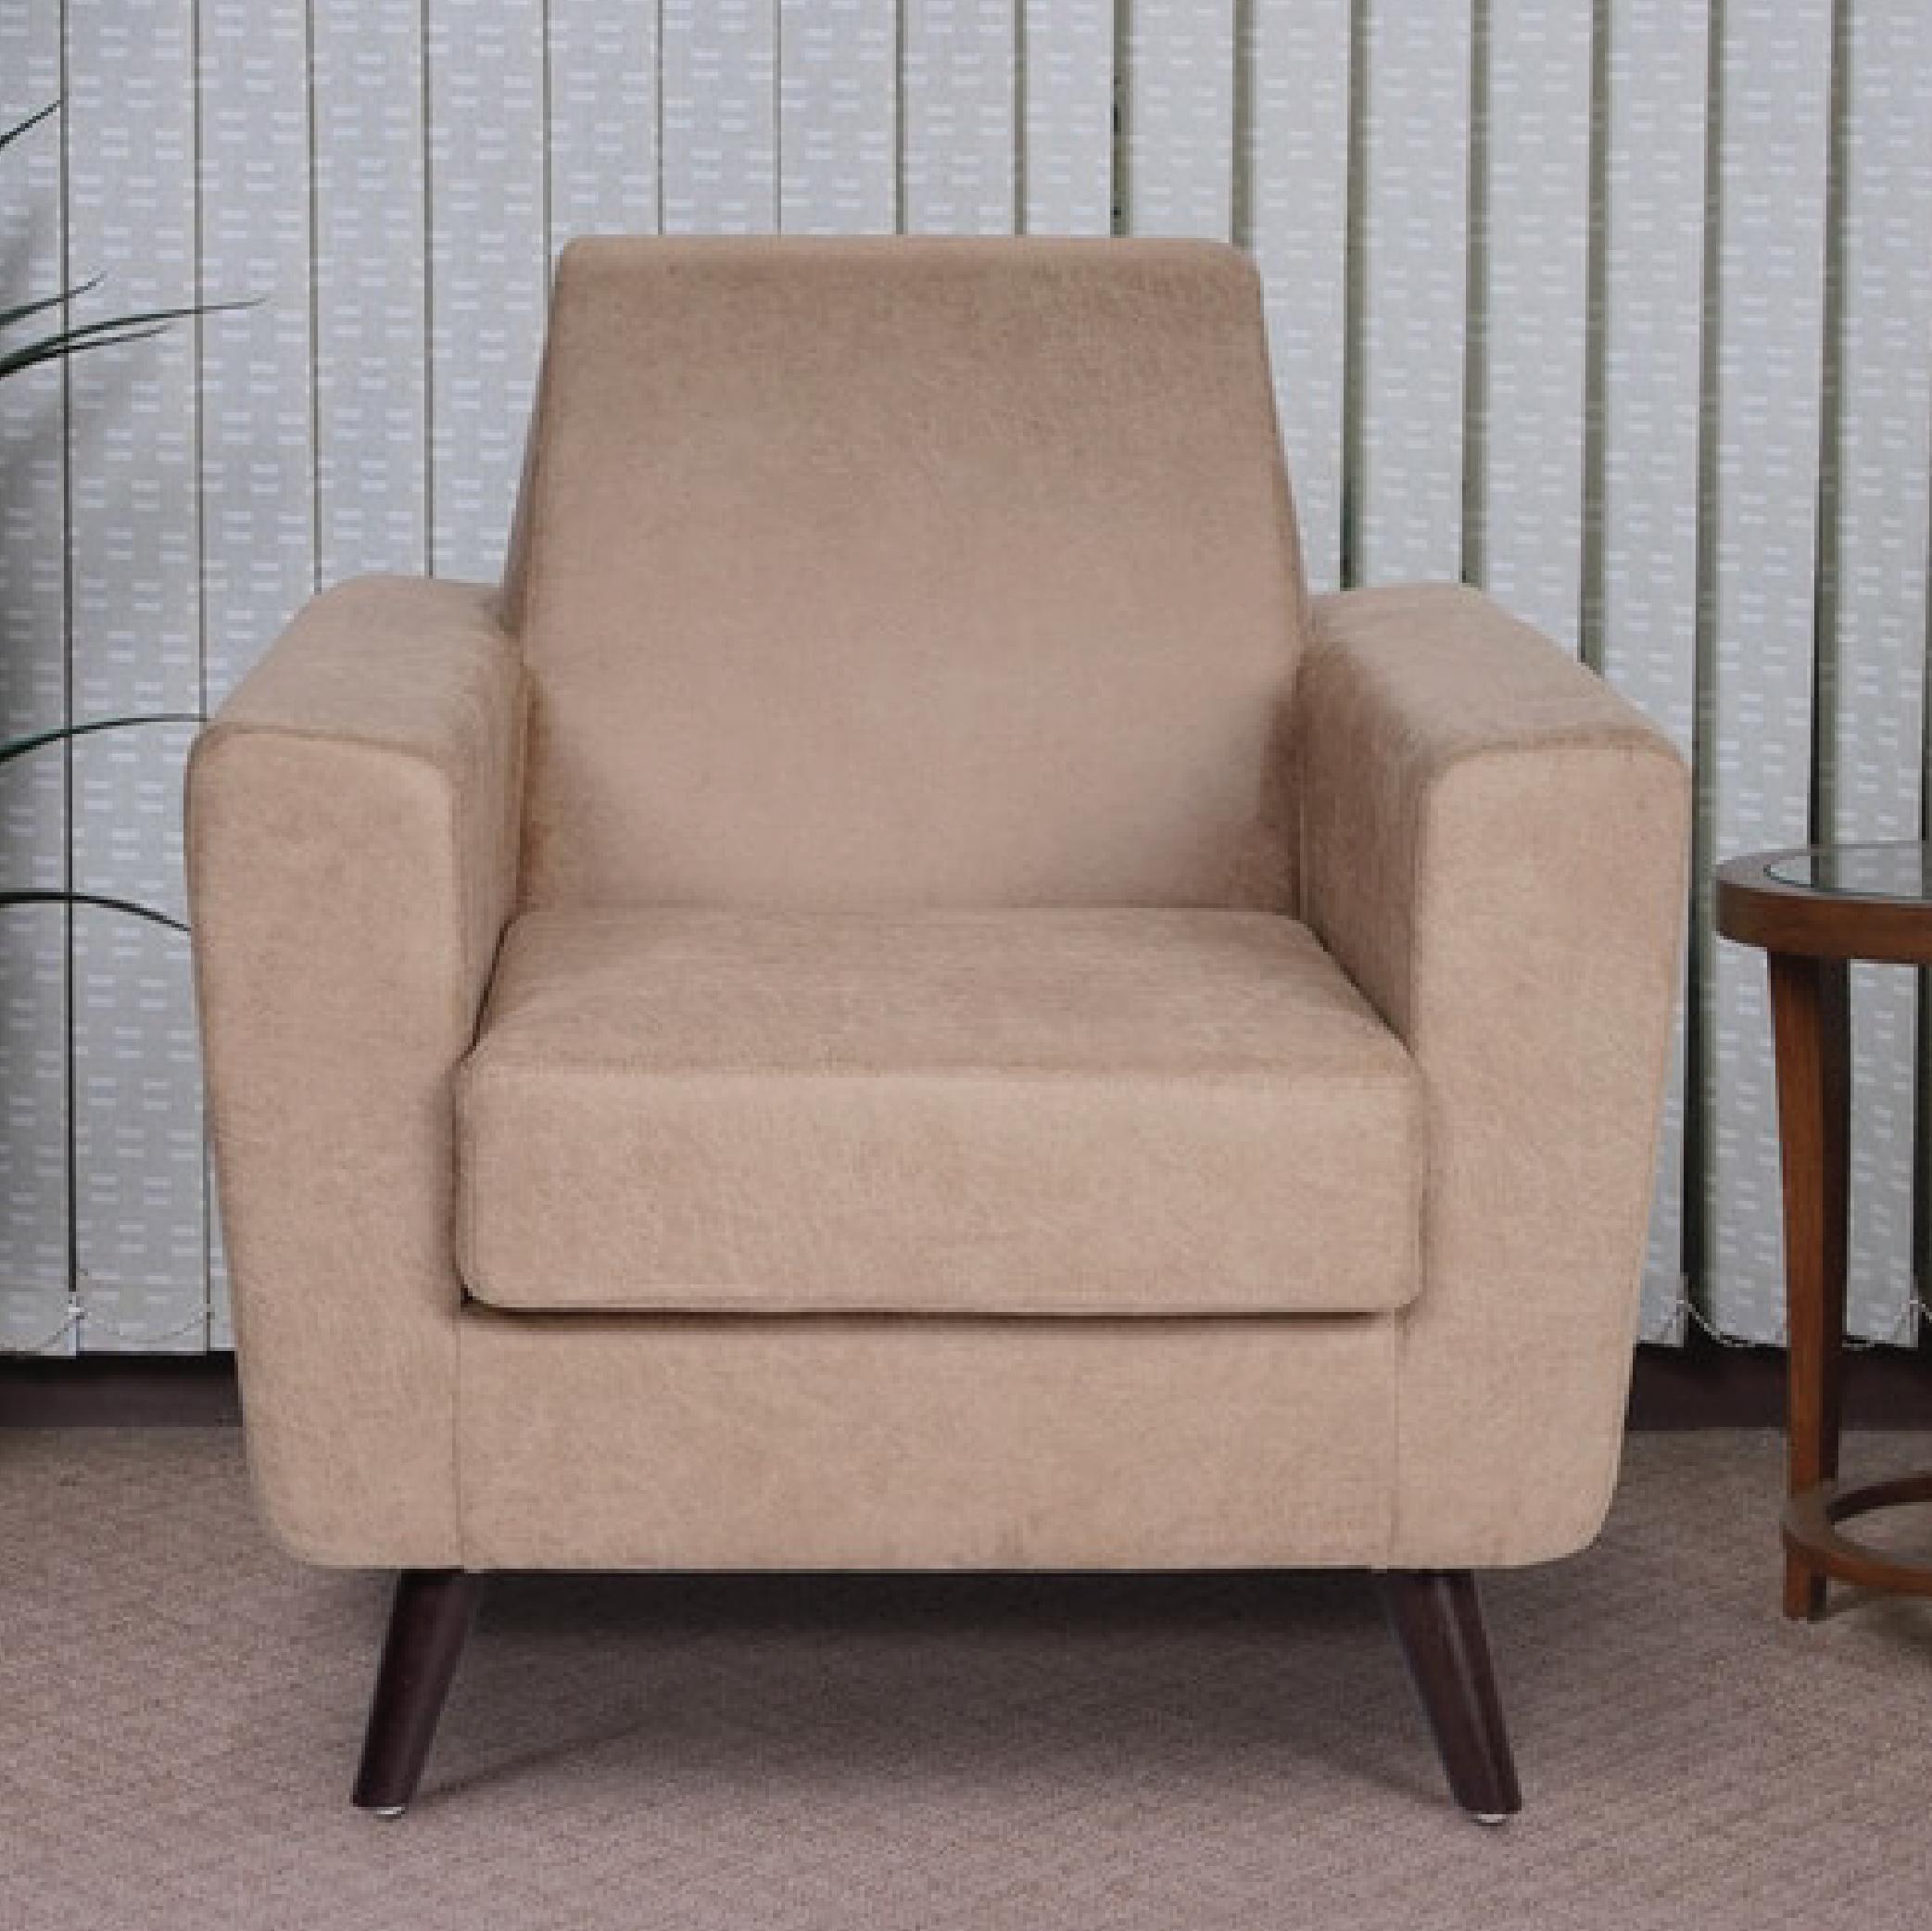 Greco One Seater Sofa in Beige Colour